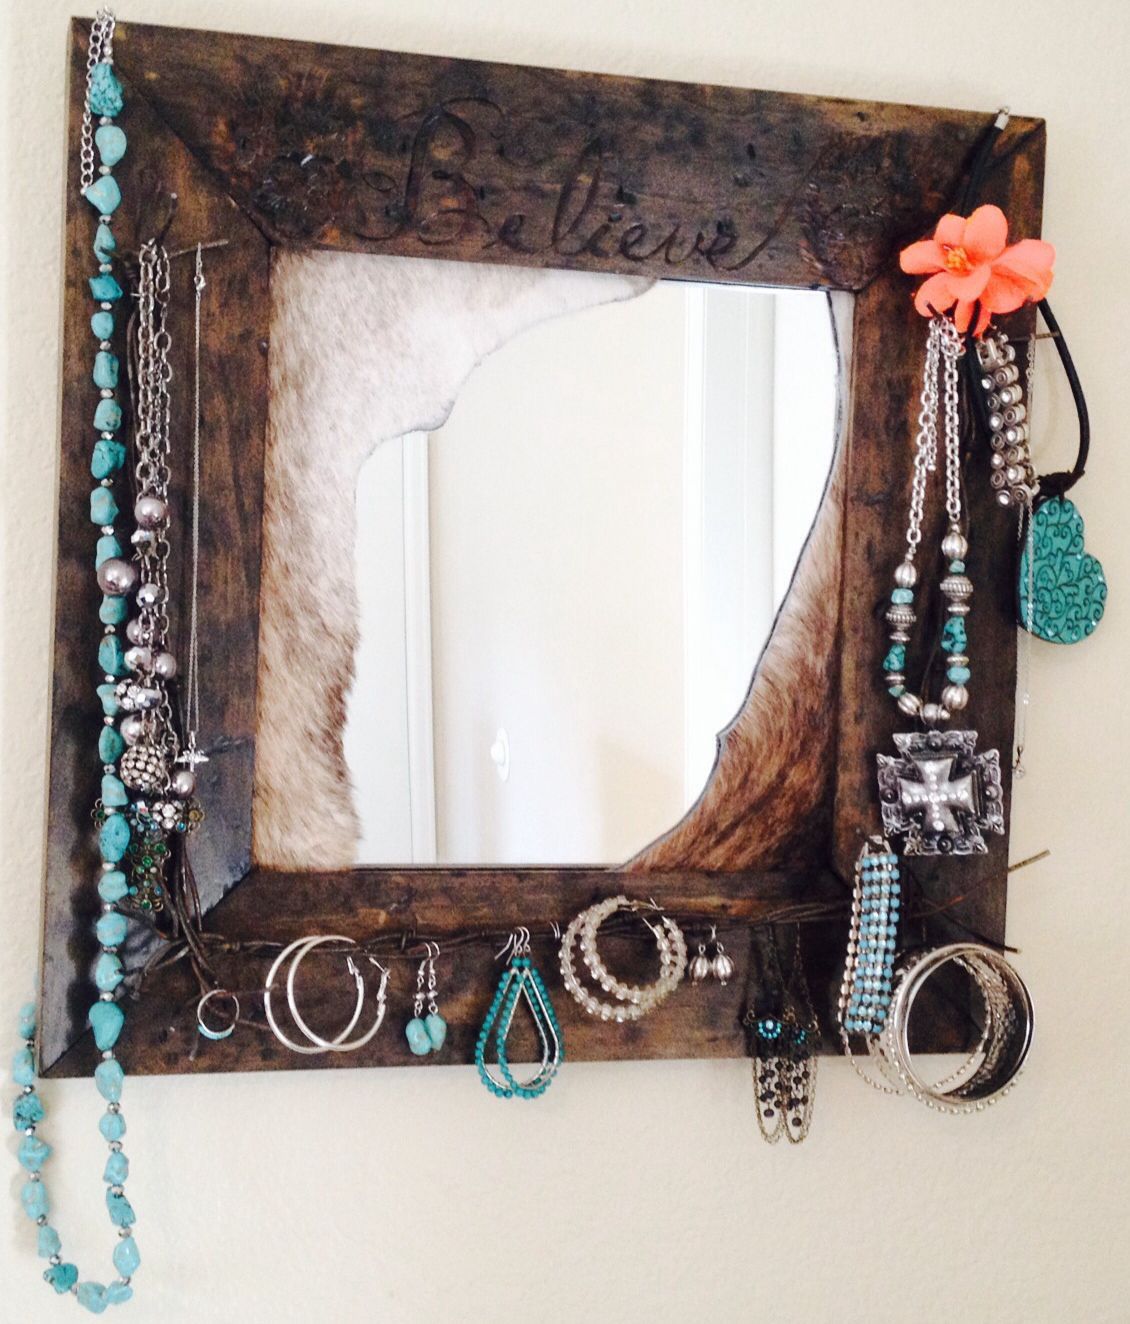 Beautiful "believe" Mirror With Jewelry Hanging On It | Jewelry Mirror Throughout Western Wall Mirrors (View 2 of 15)